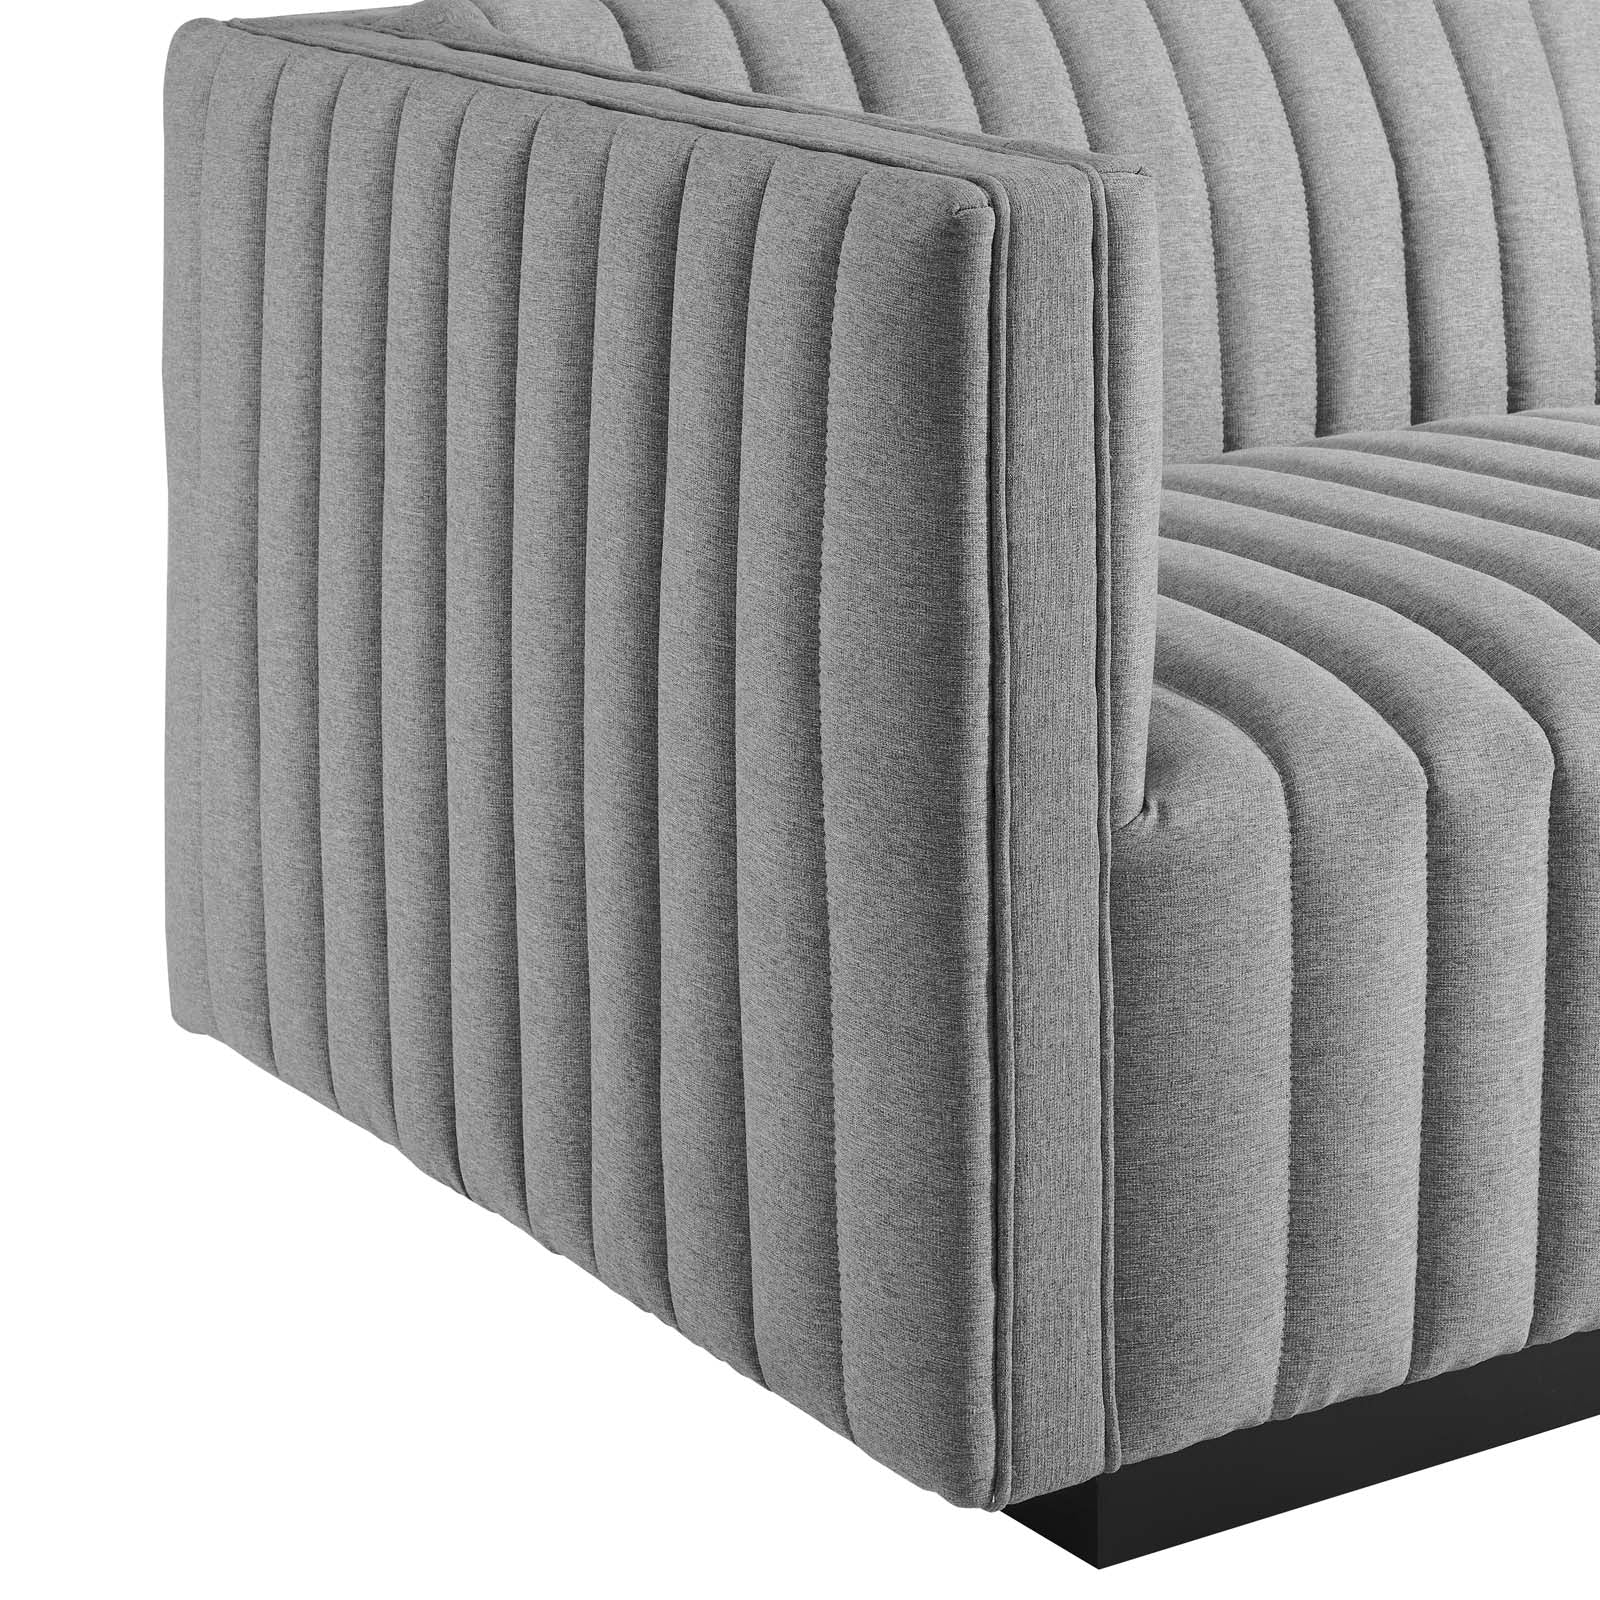 Modway Sectional Sofas - Conjure Channel Tufted Upholstered Fabric 5-Piece L-Shaped Sectional Black Light Gray